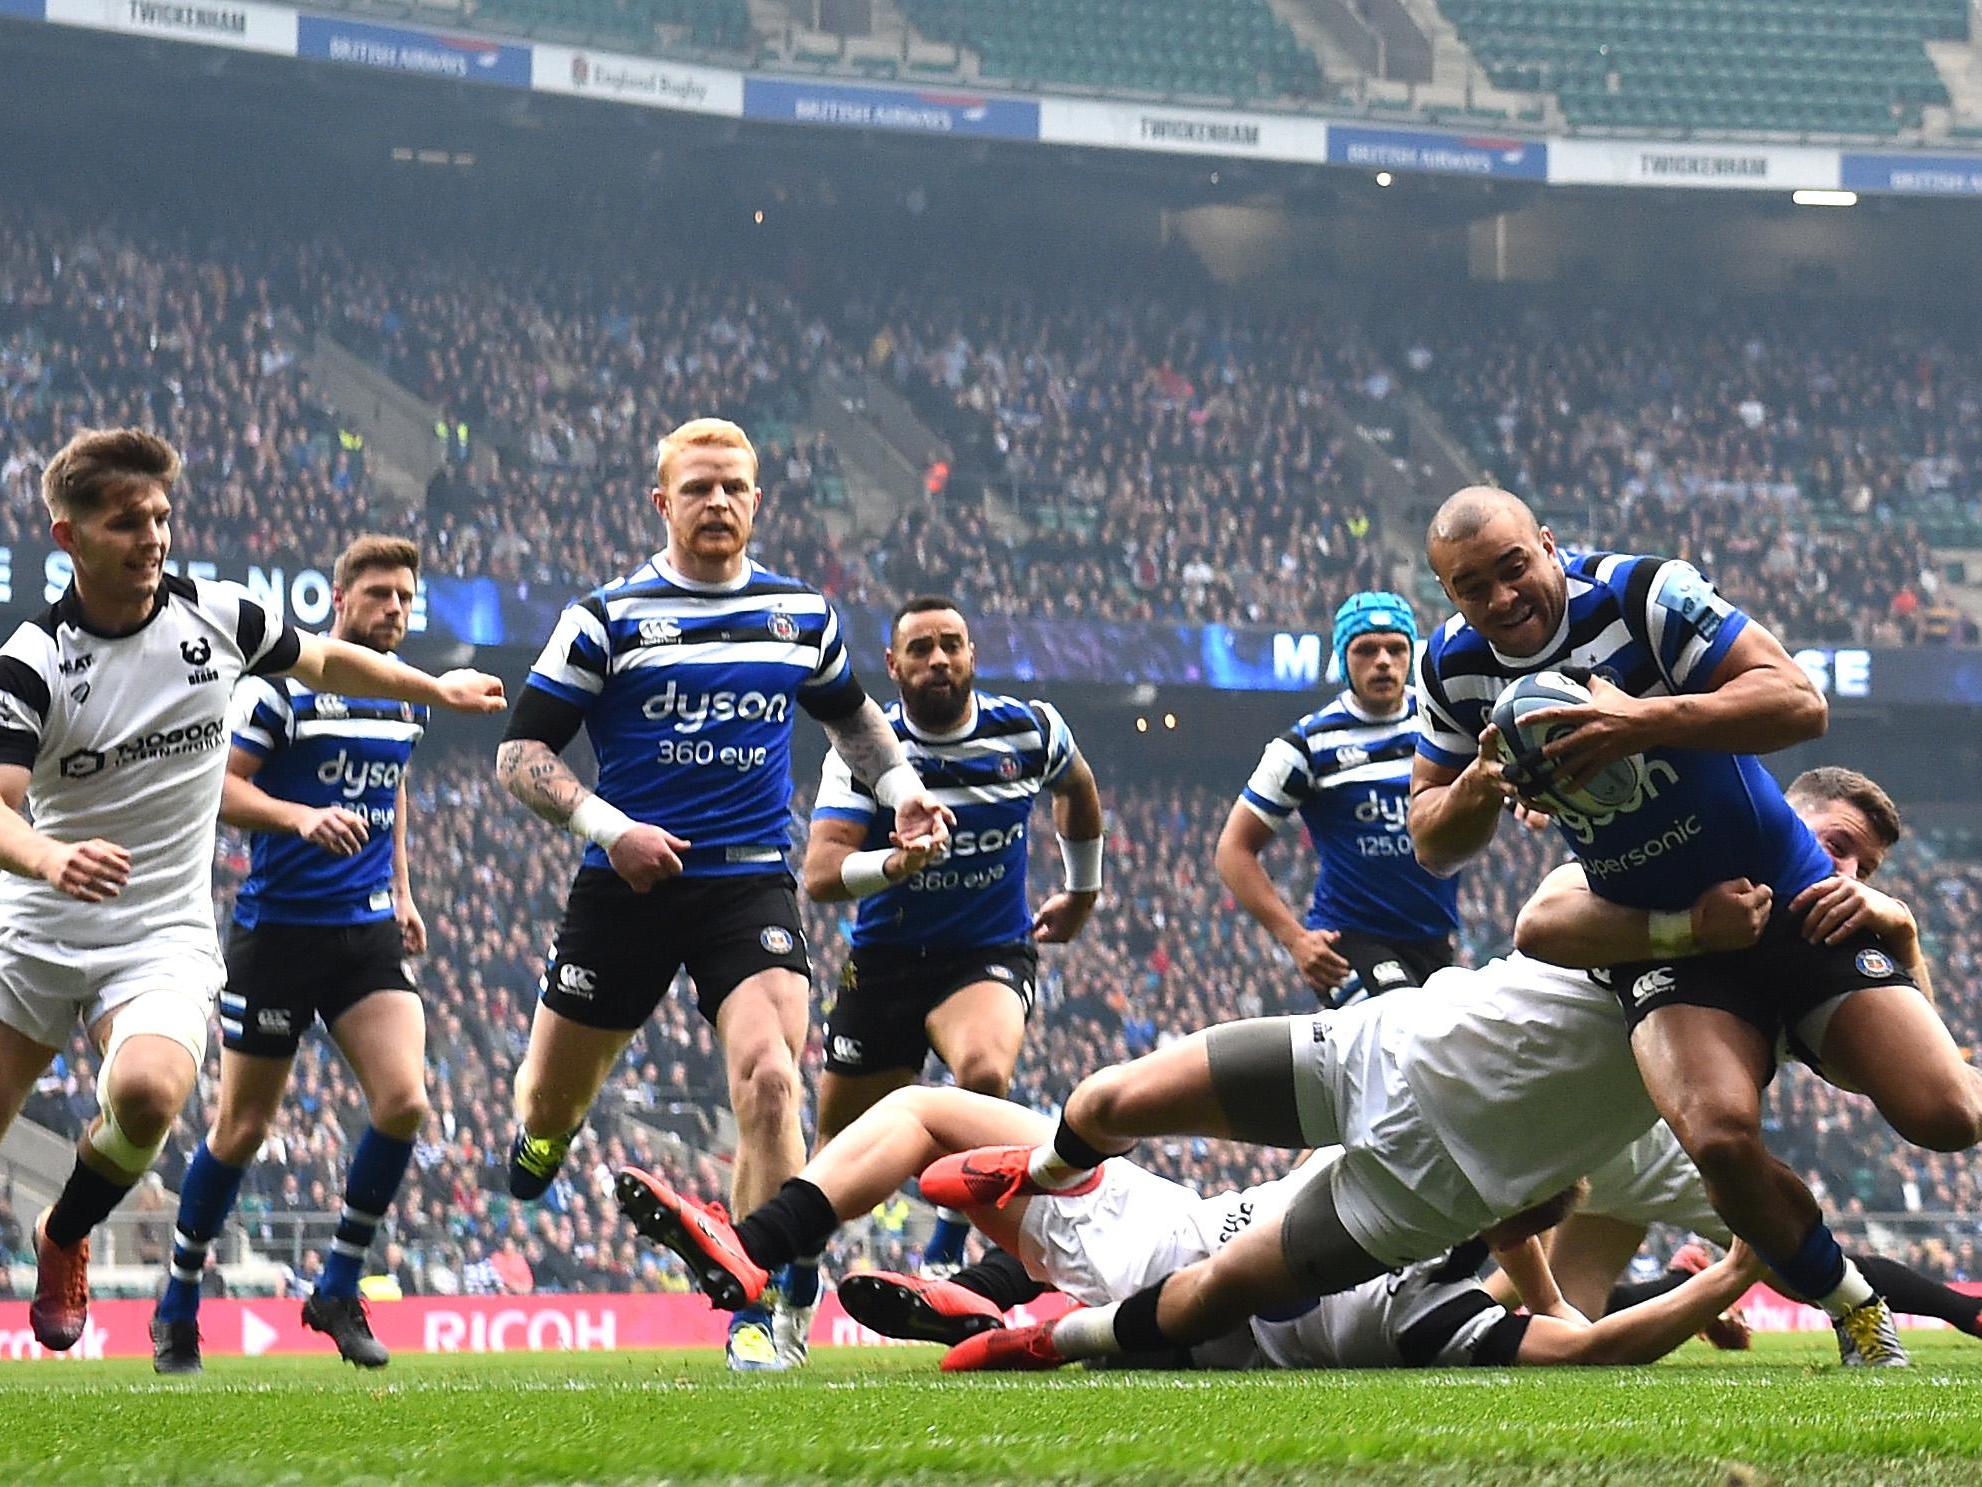 Jonathan Joseph escapes the challenge of Luke Daniels to touch down for Bath